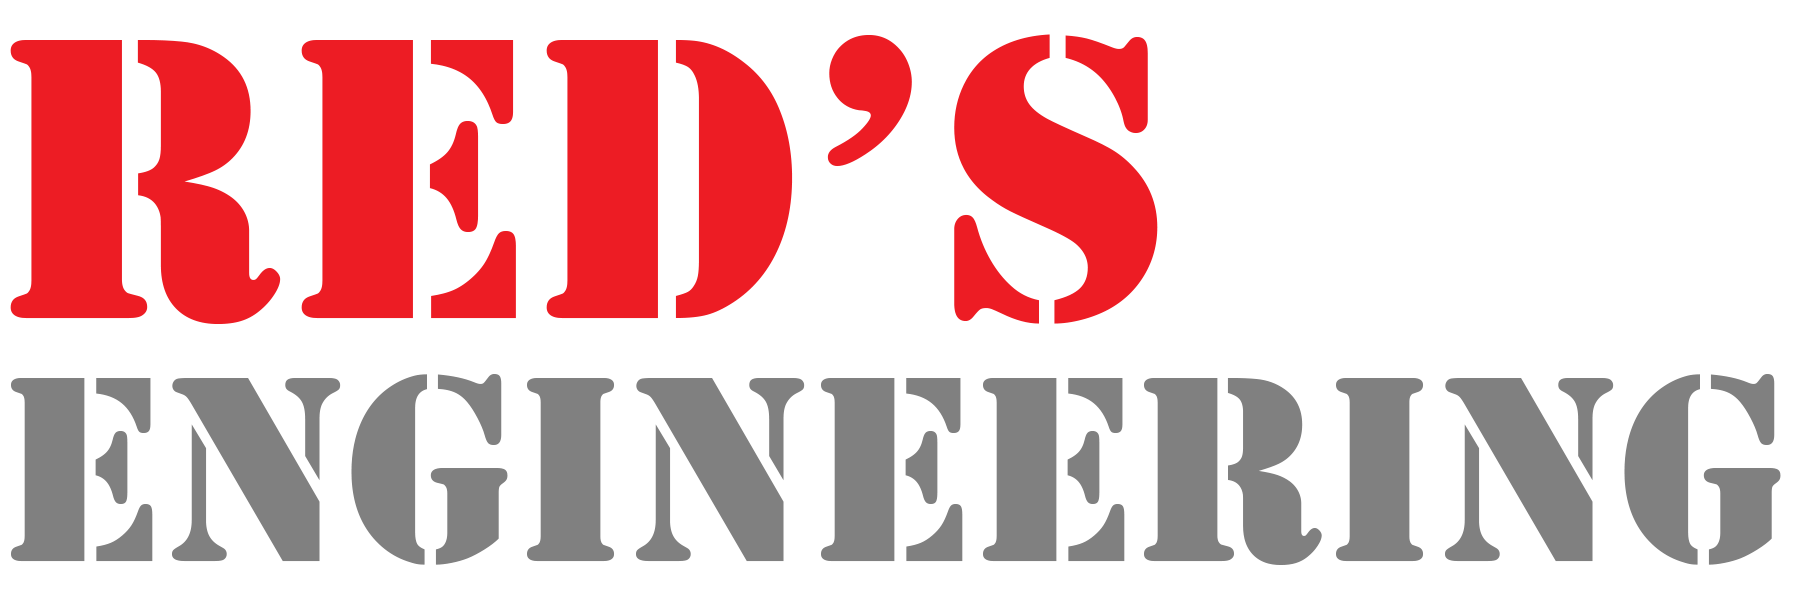 Red's Engineering